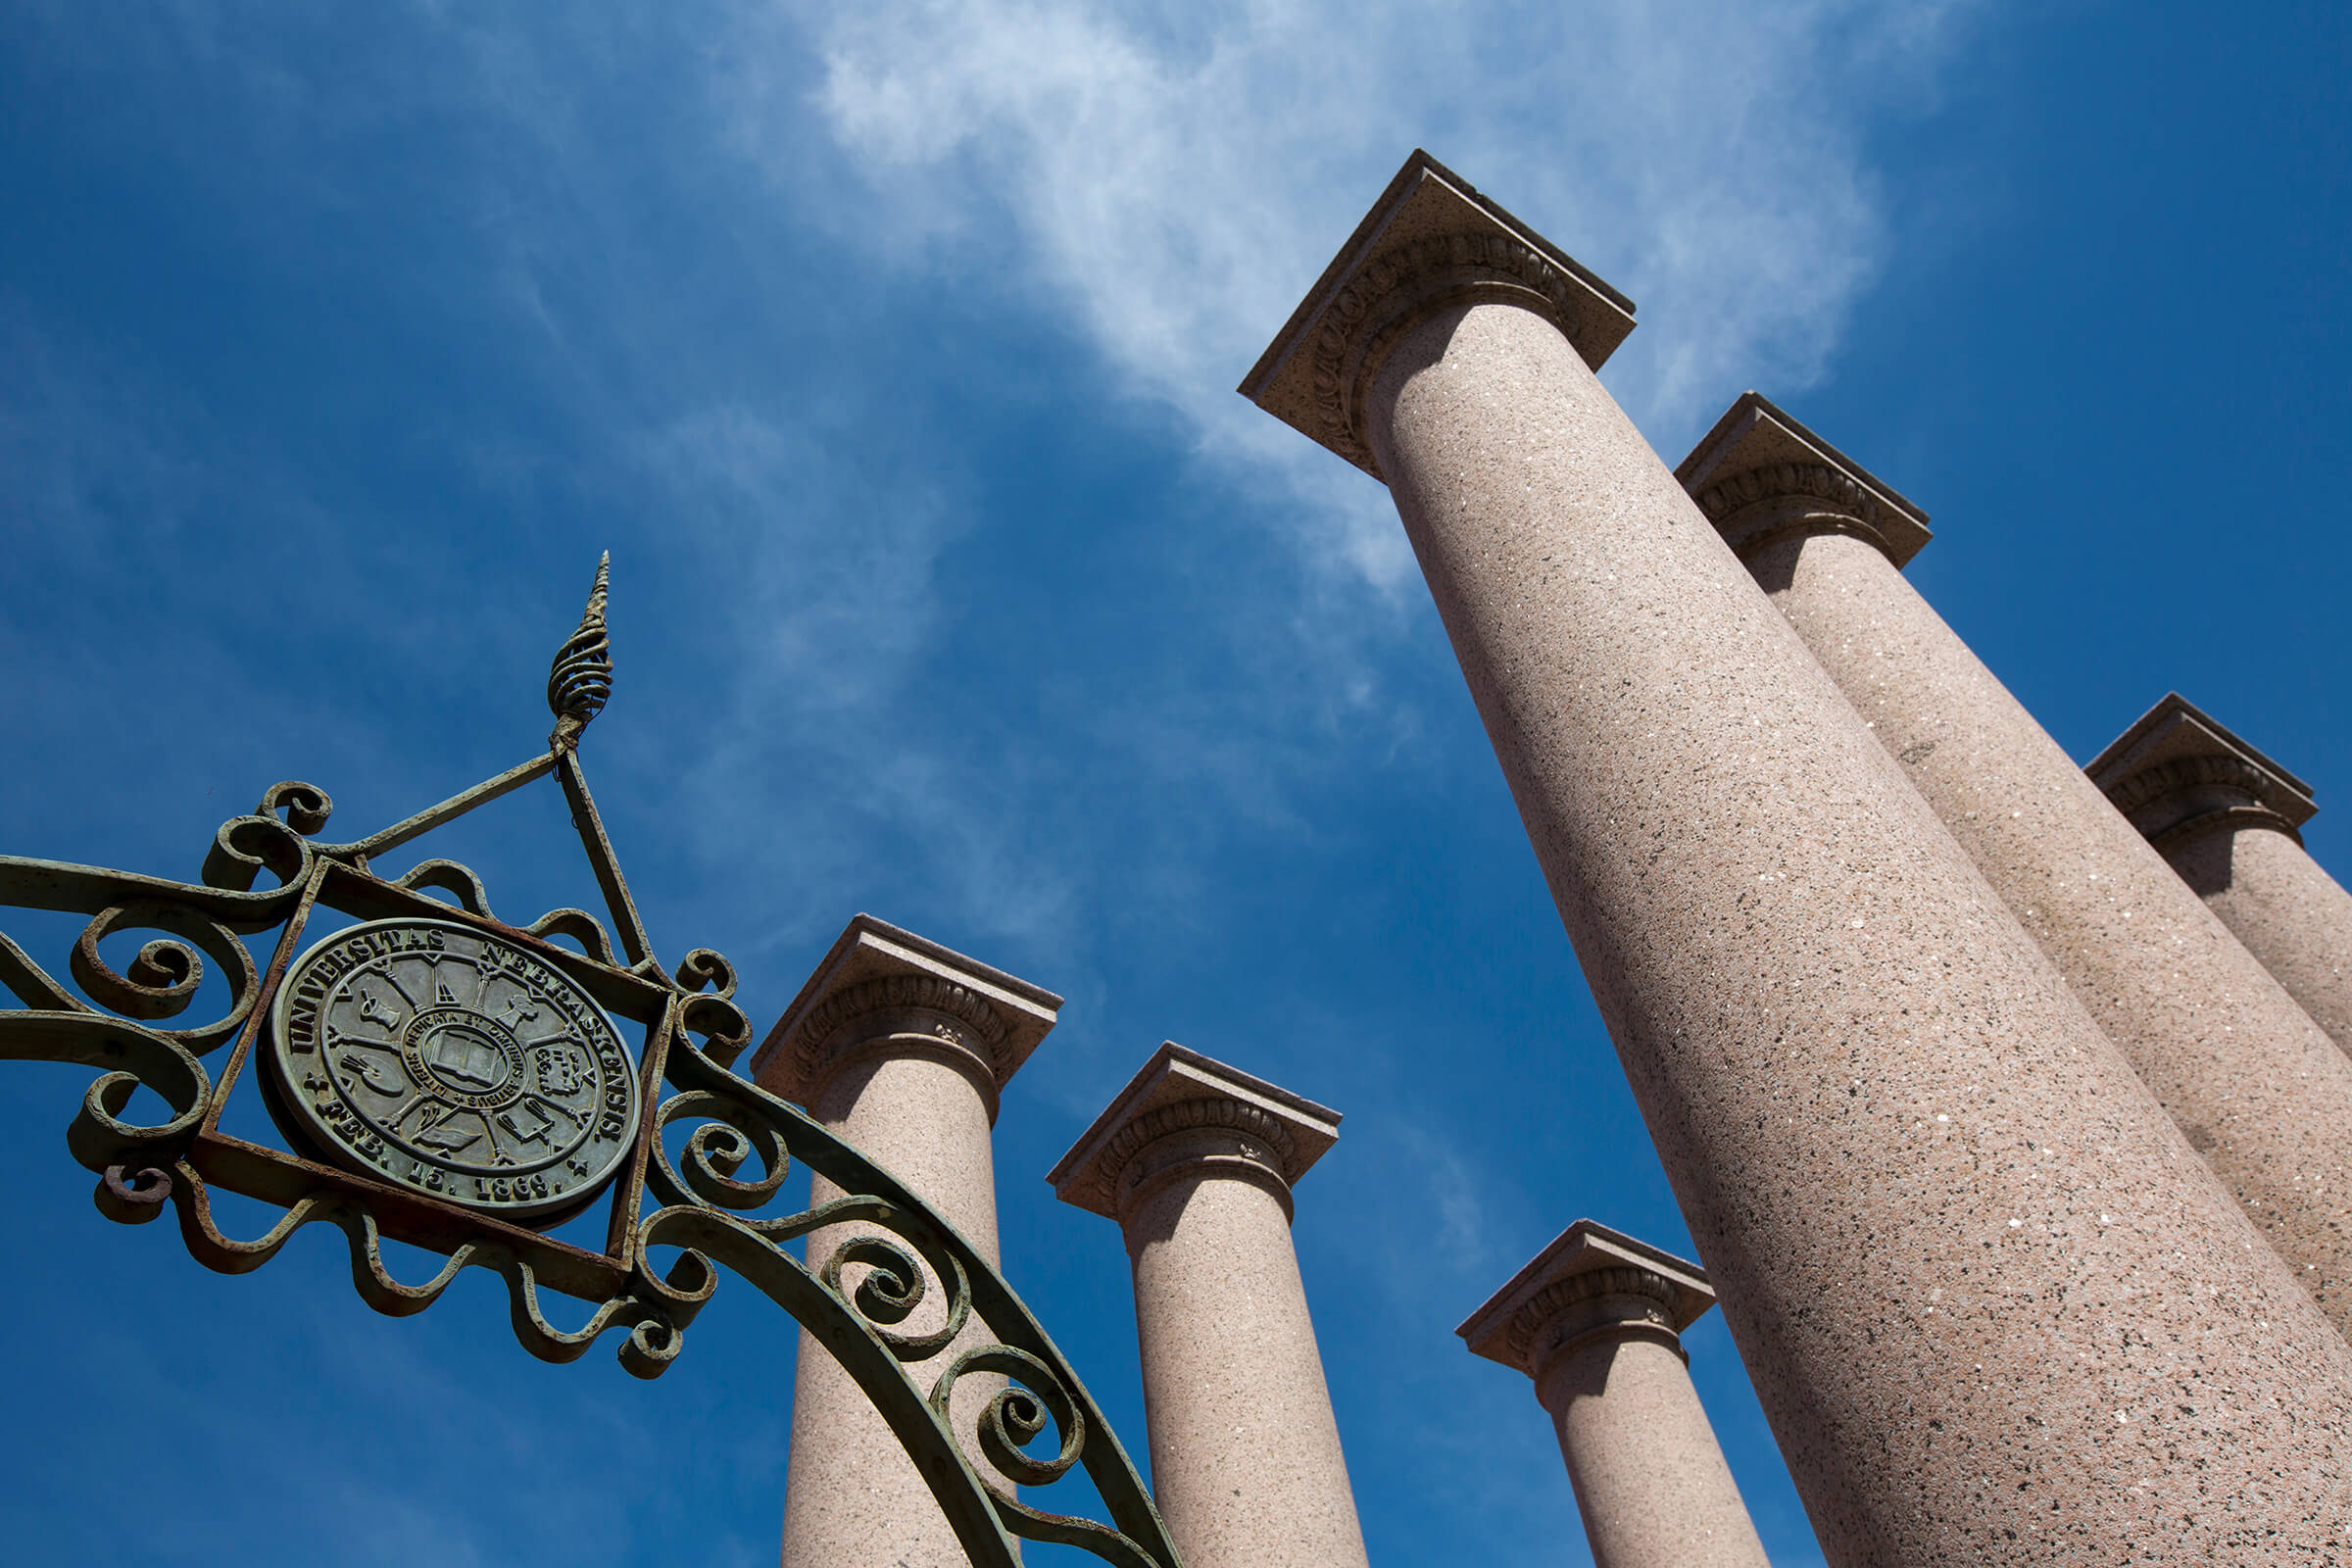 Columns and metal University seal in front of blue sky